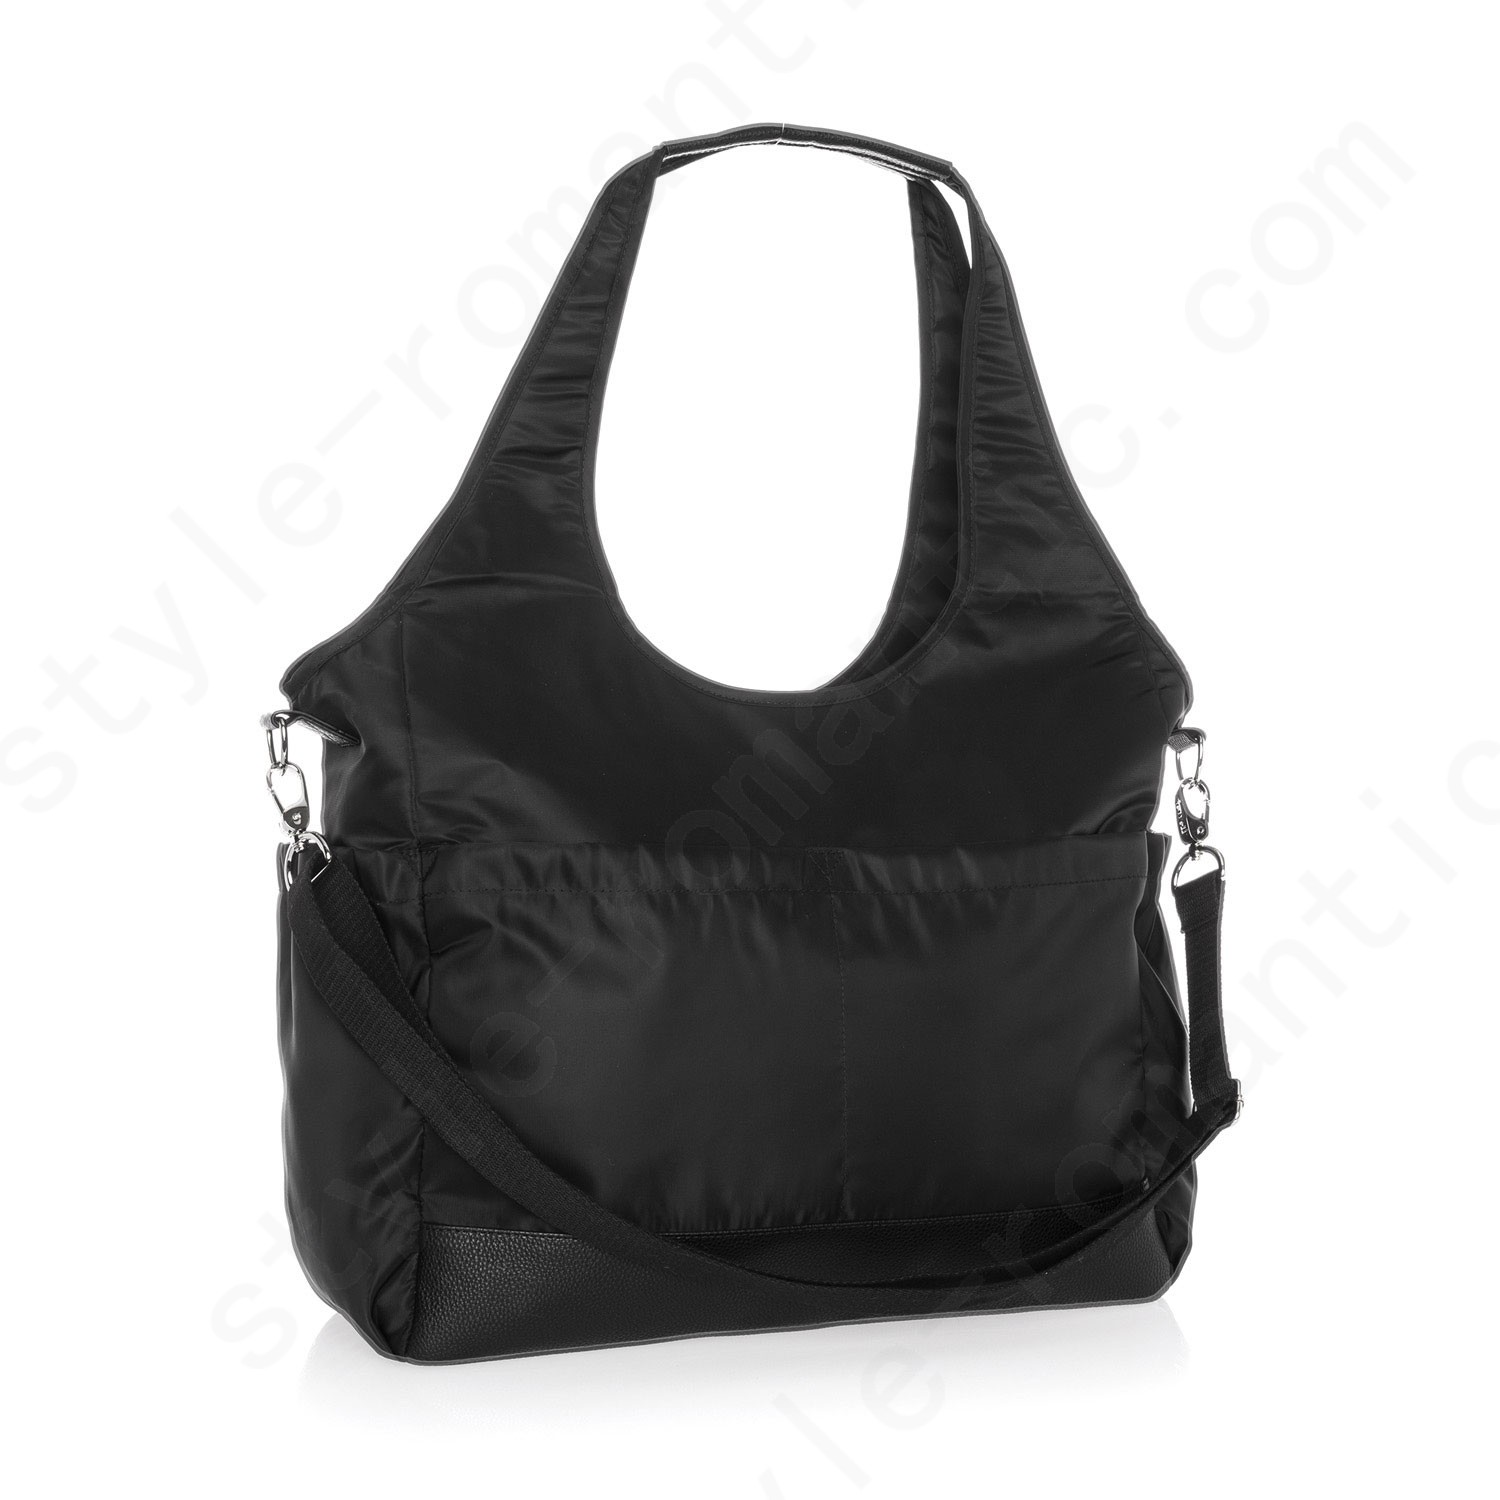 Thirty-One Gifts City Park Bags - Black Beauty - Thirty-One Gifts City Park Bags - Black Beauty